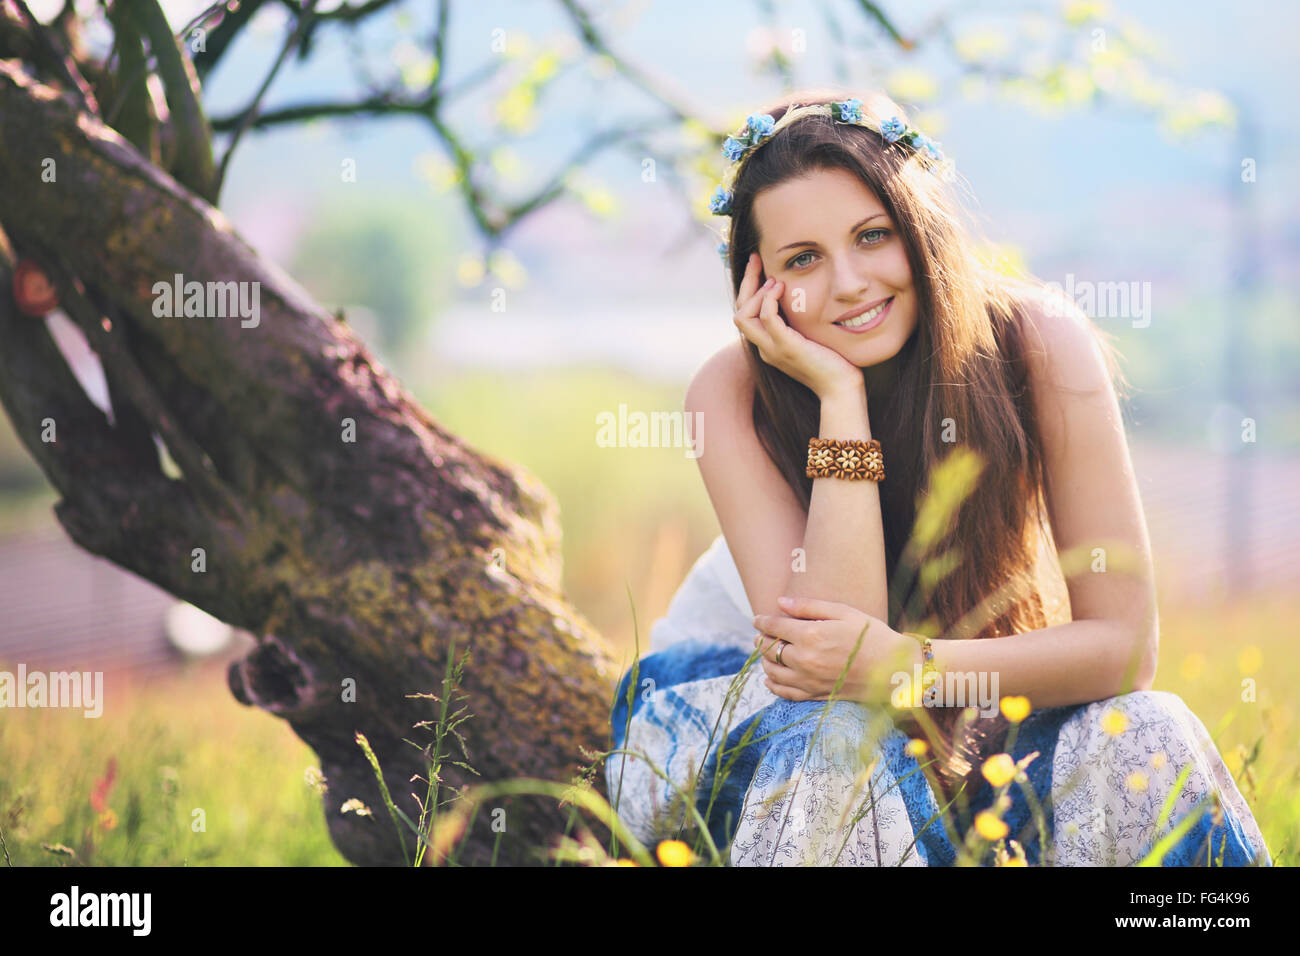 Smiling and joyful woman in spring meadow. Nature and harmony Stock Photo